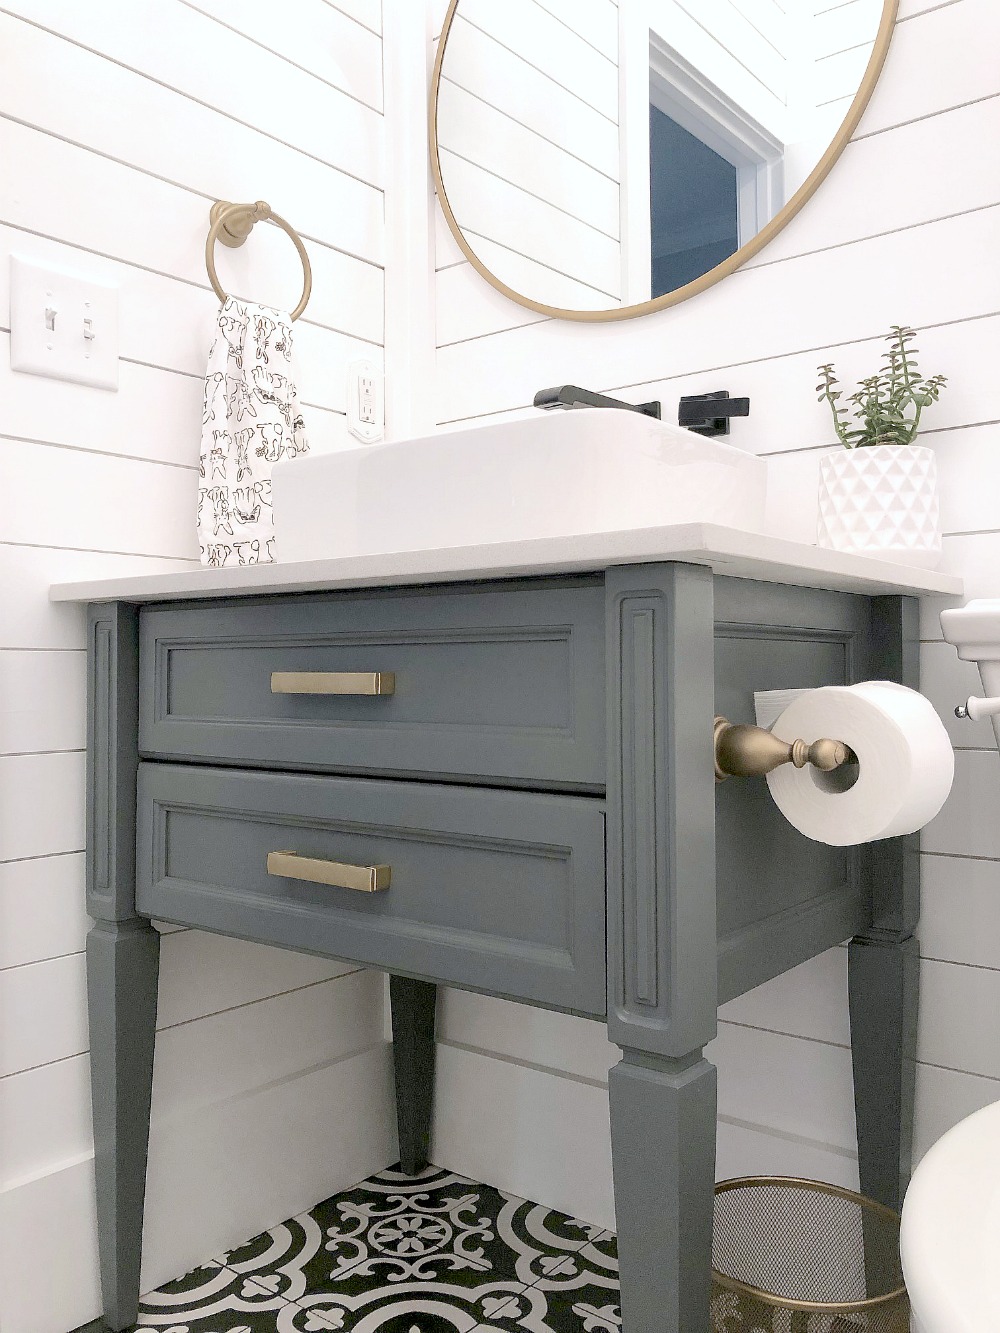 Ideas on how to update a 15 year old bathroom vanity